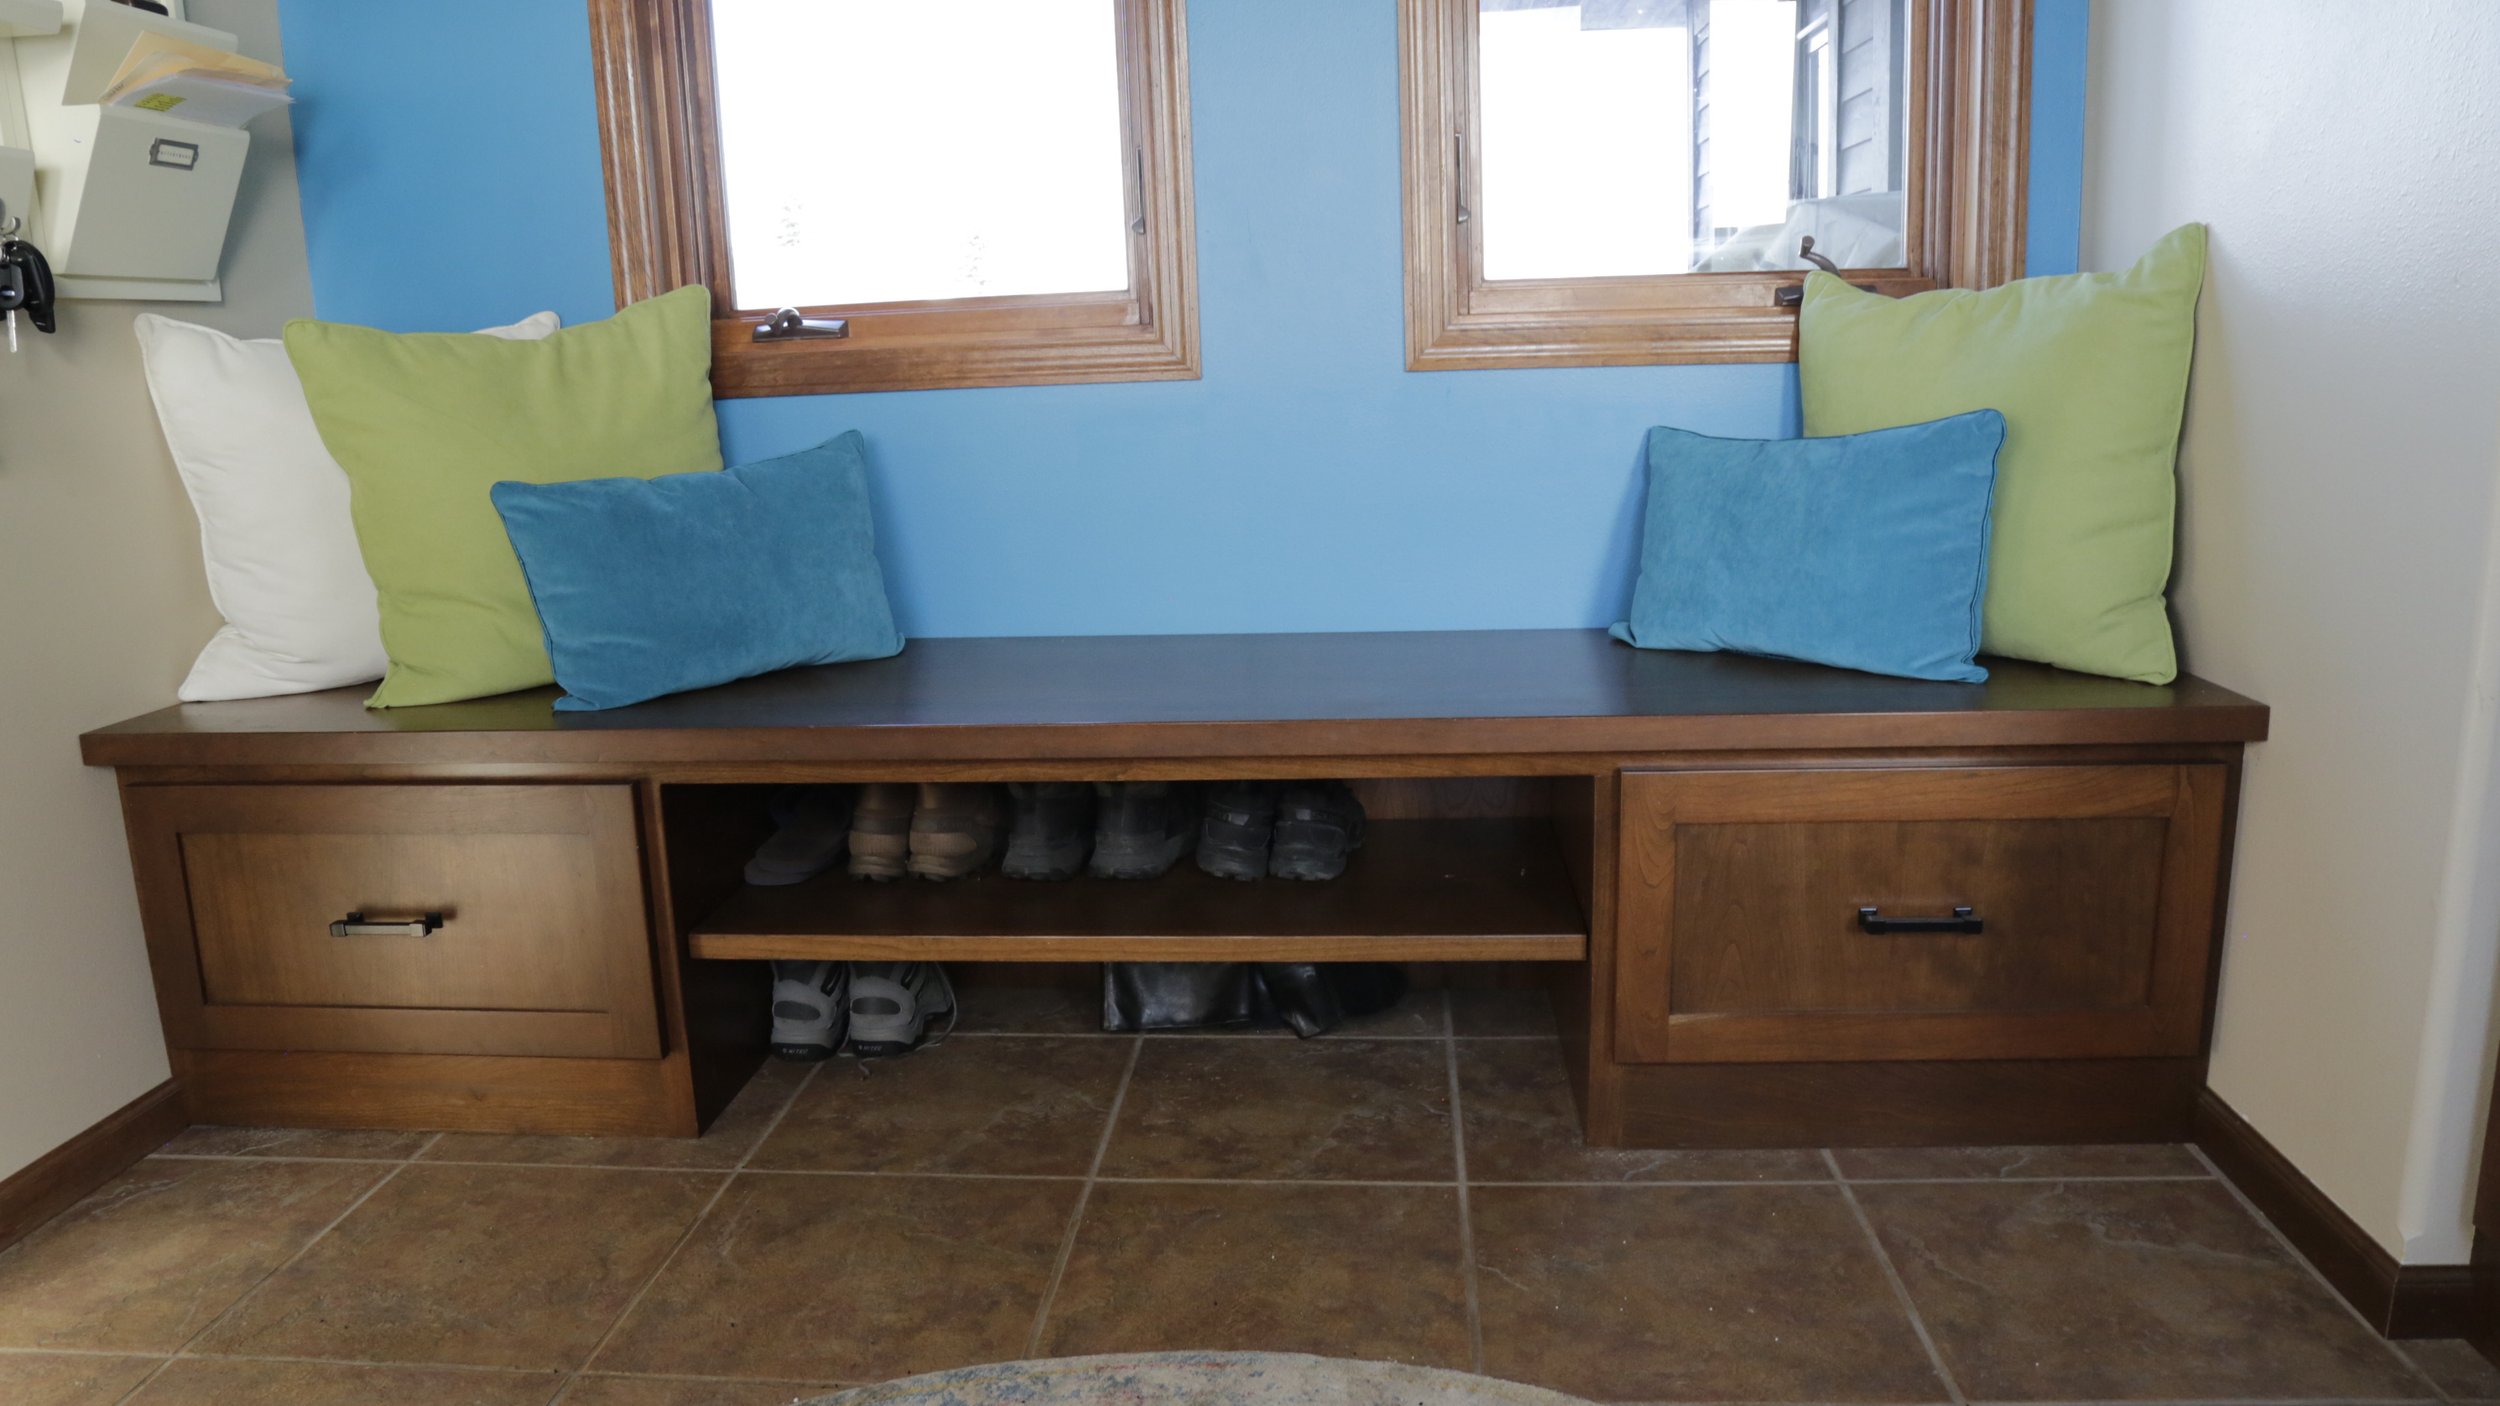 Interior Wooden Bench Complete with Additional Storage Space for Shoes and More